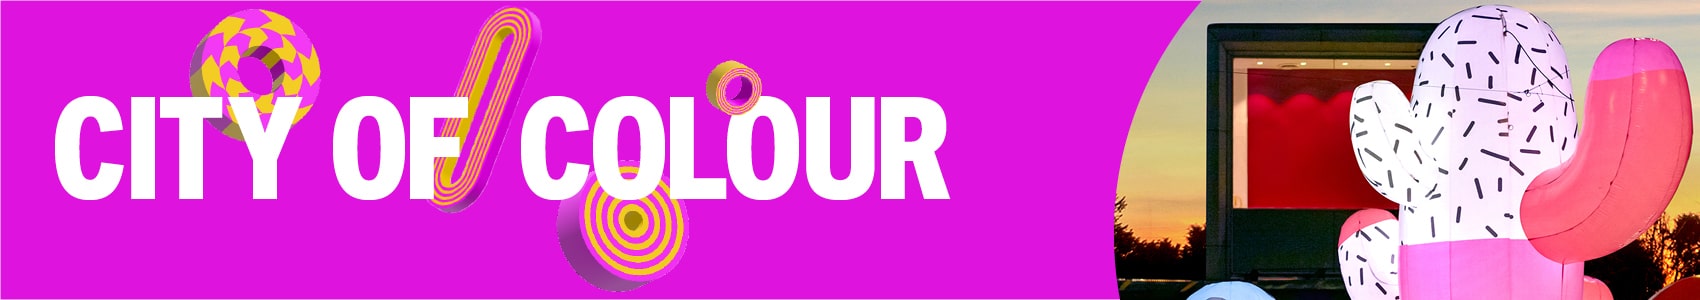 City of Colour to light up the heart of Auckland in May  